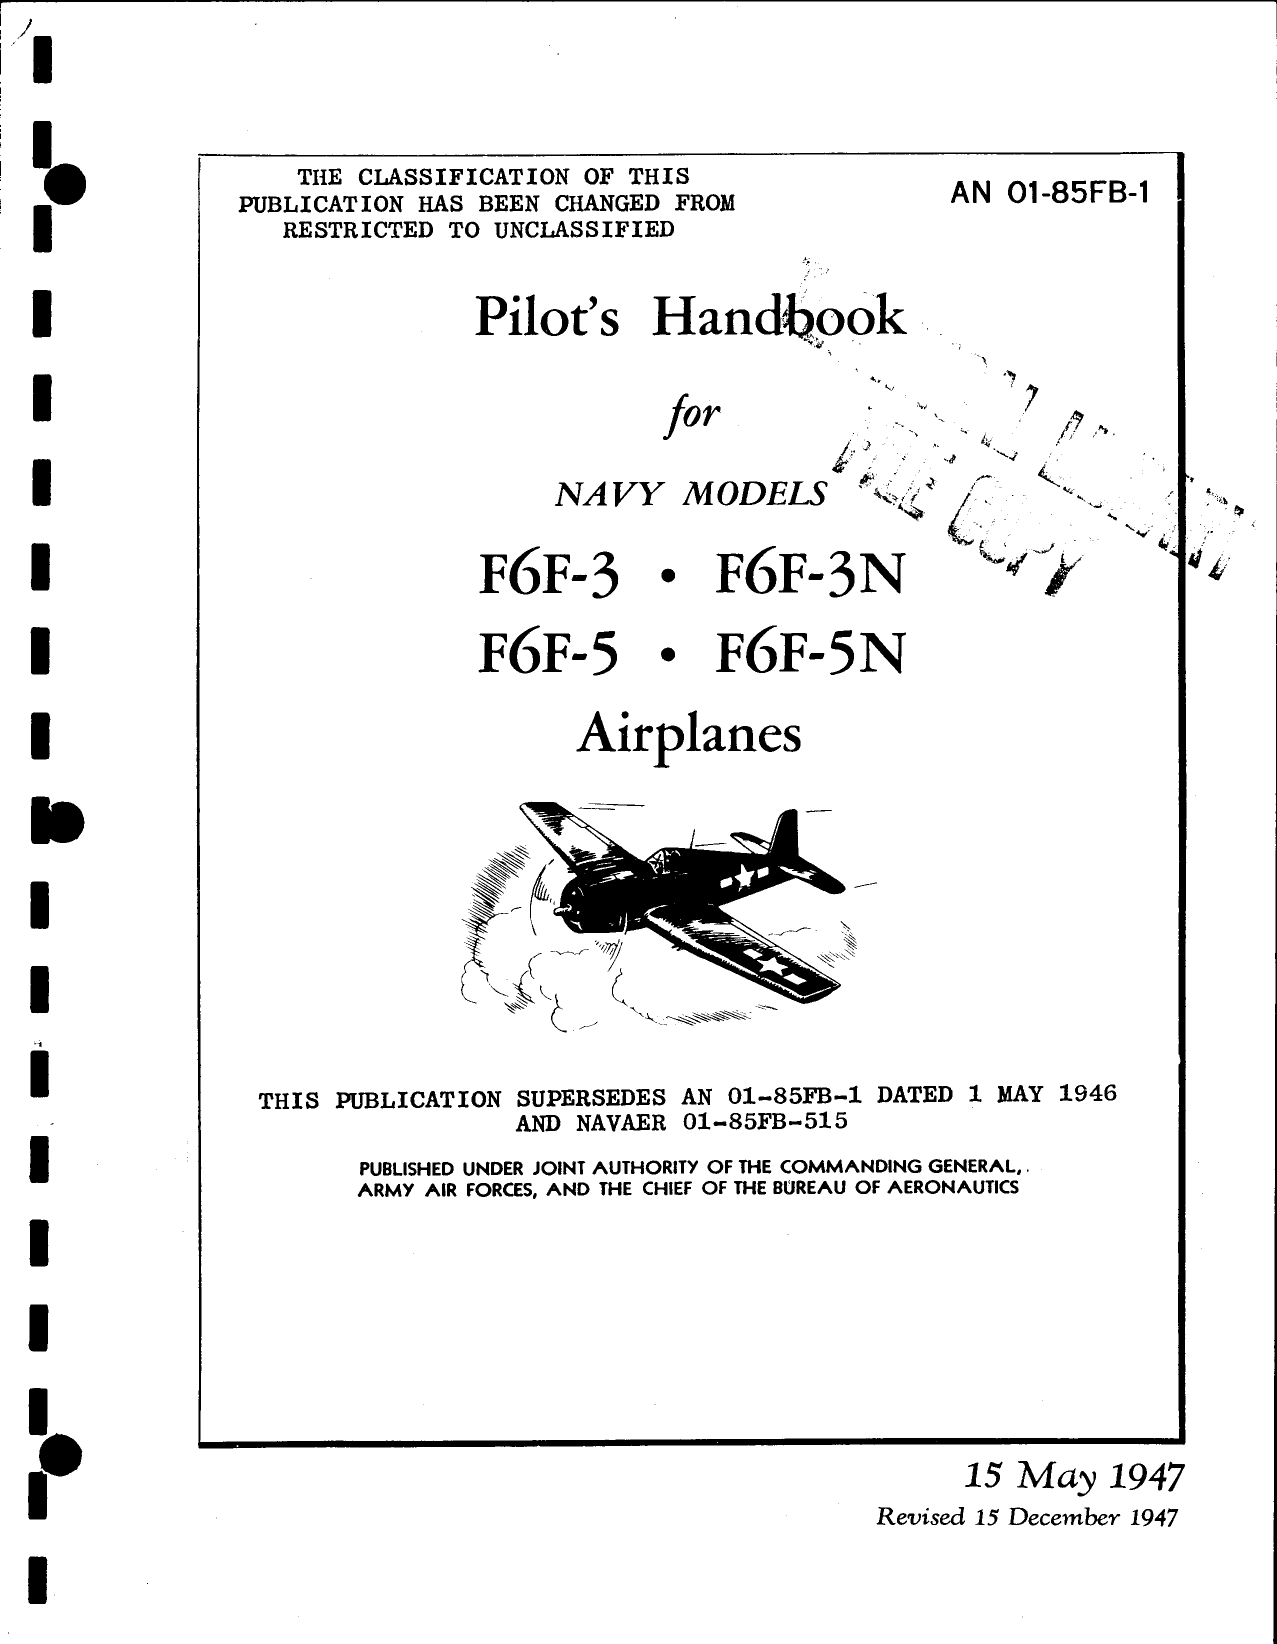 Sample page 5 from AirCorps Library document: Pilot's Handbook for Navy Models F6F-3, F6F-3N, F6F-5 and F6F-5N